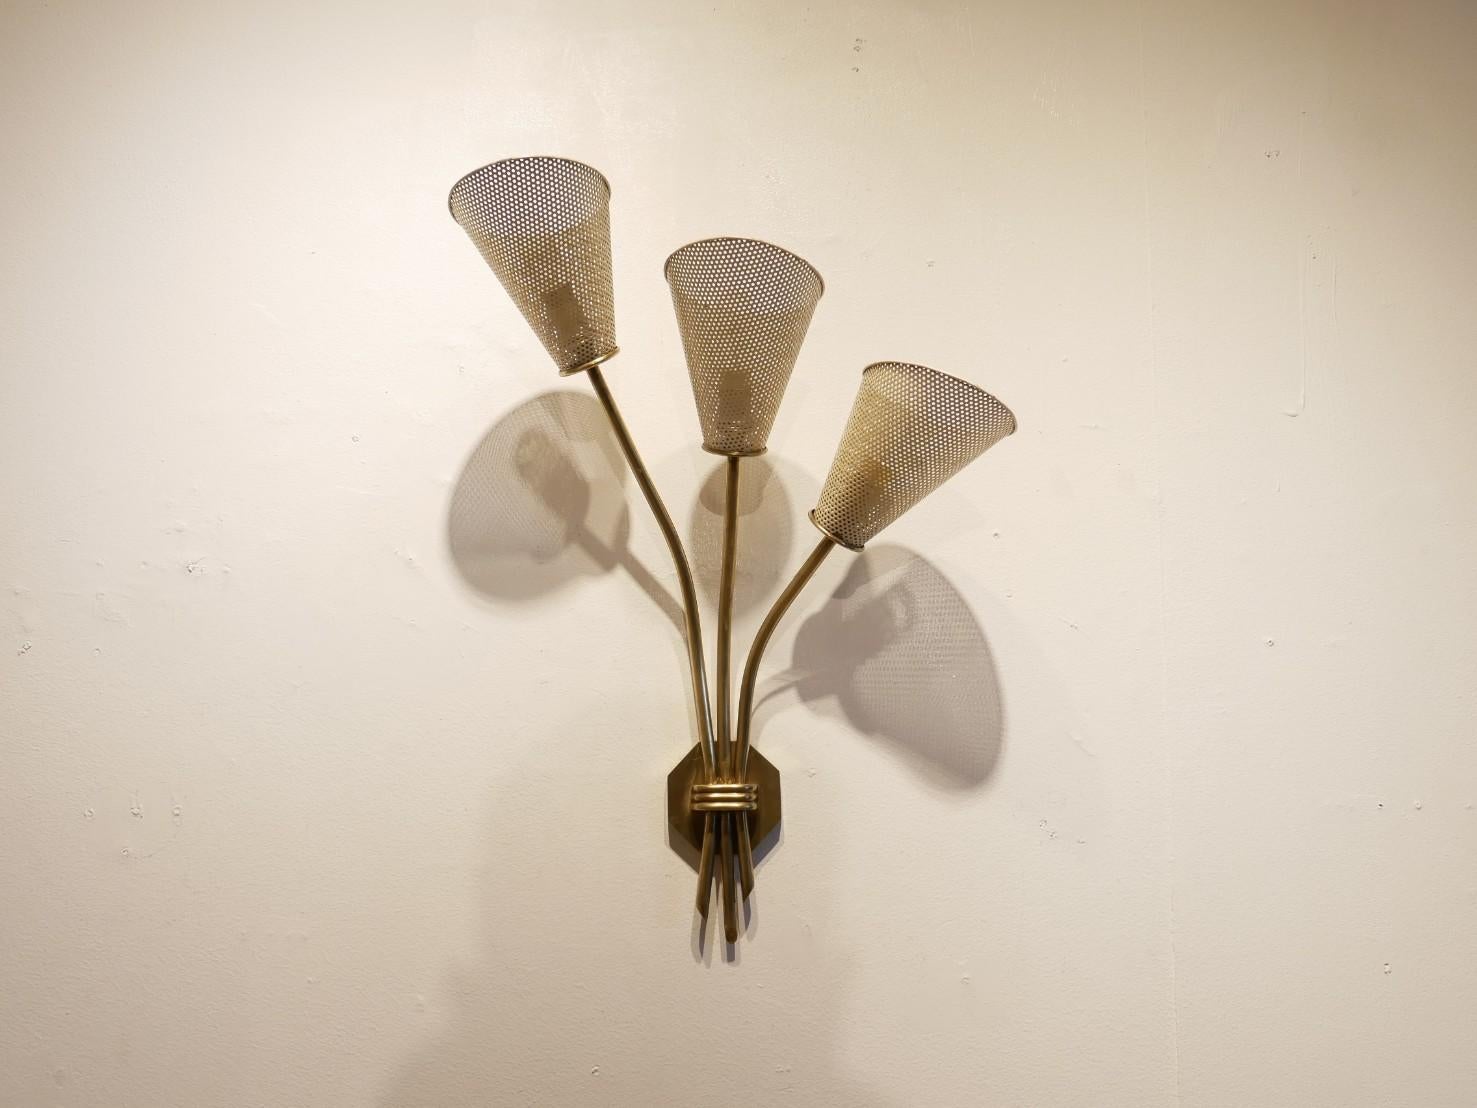 Midcentury french design wall sconce from Kobis & Laurence - full brass 3 stems structure matched with original white painted perforated metal diffusers.